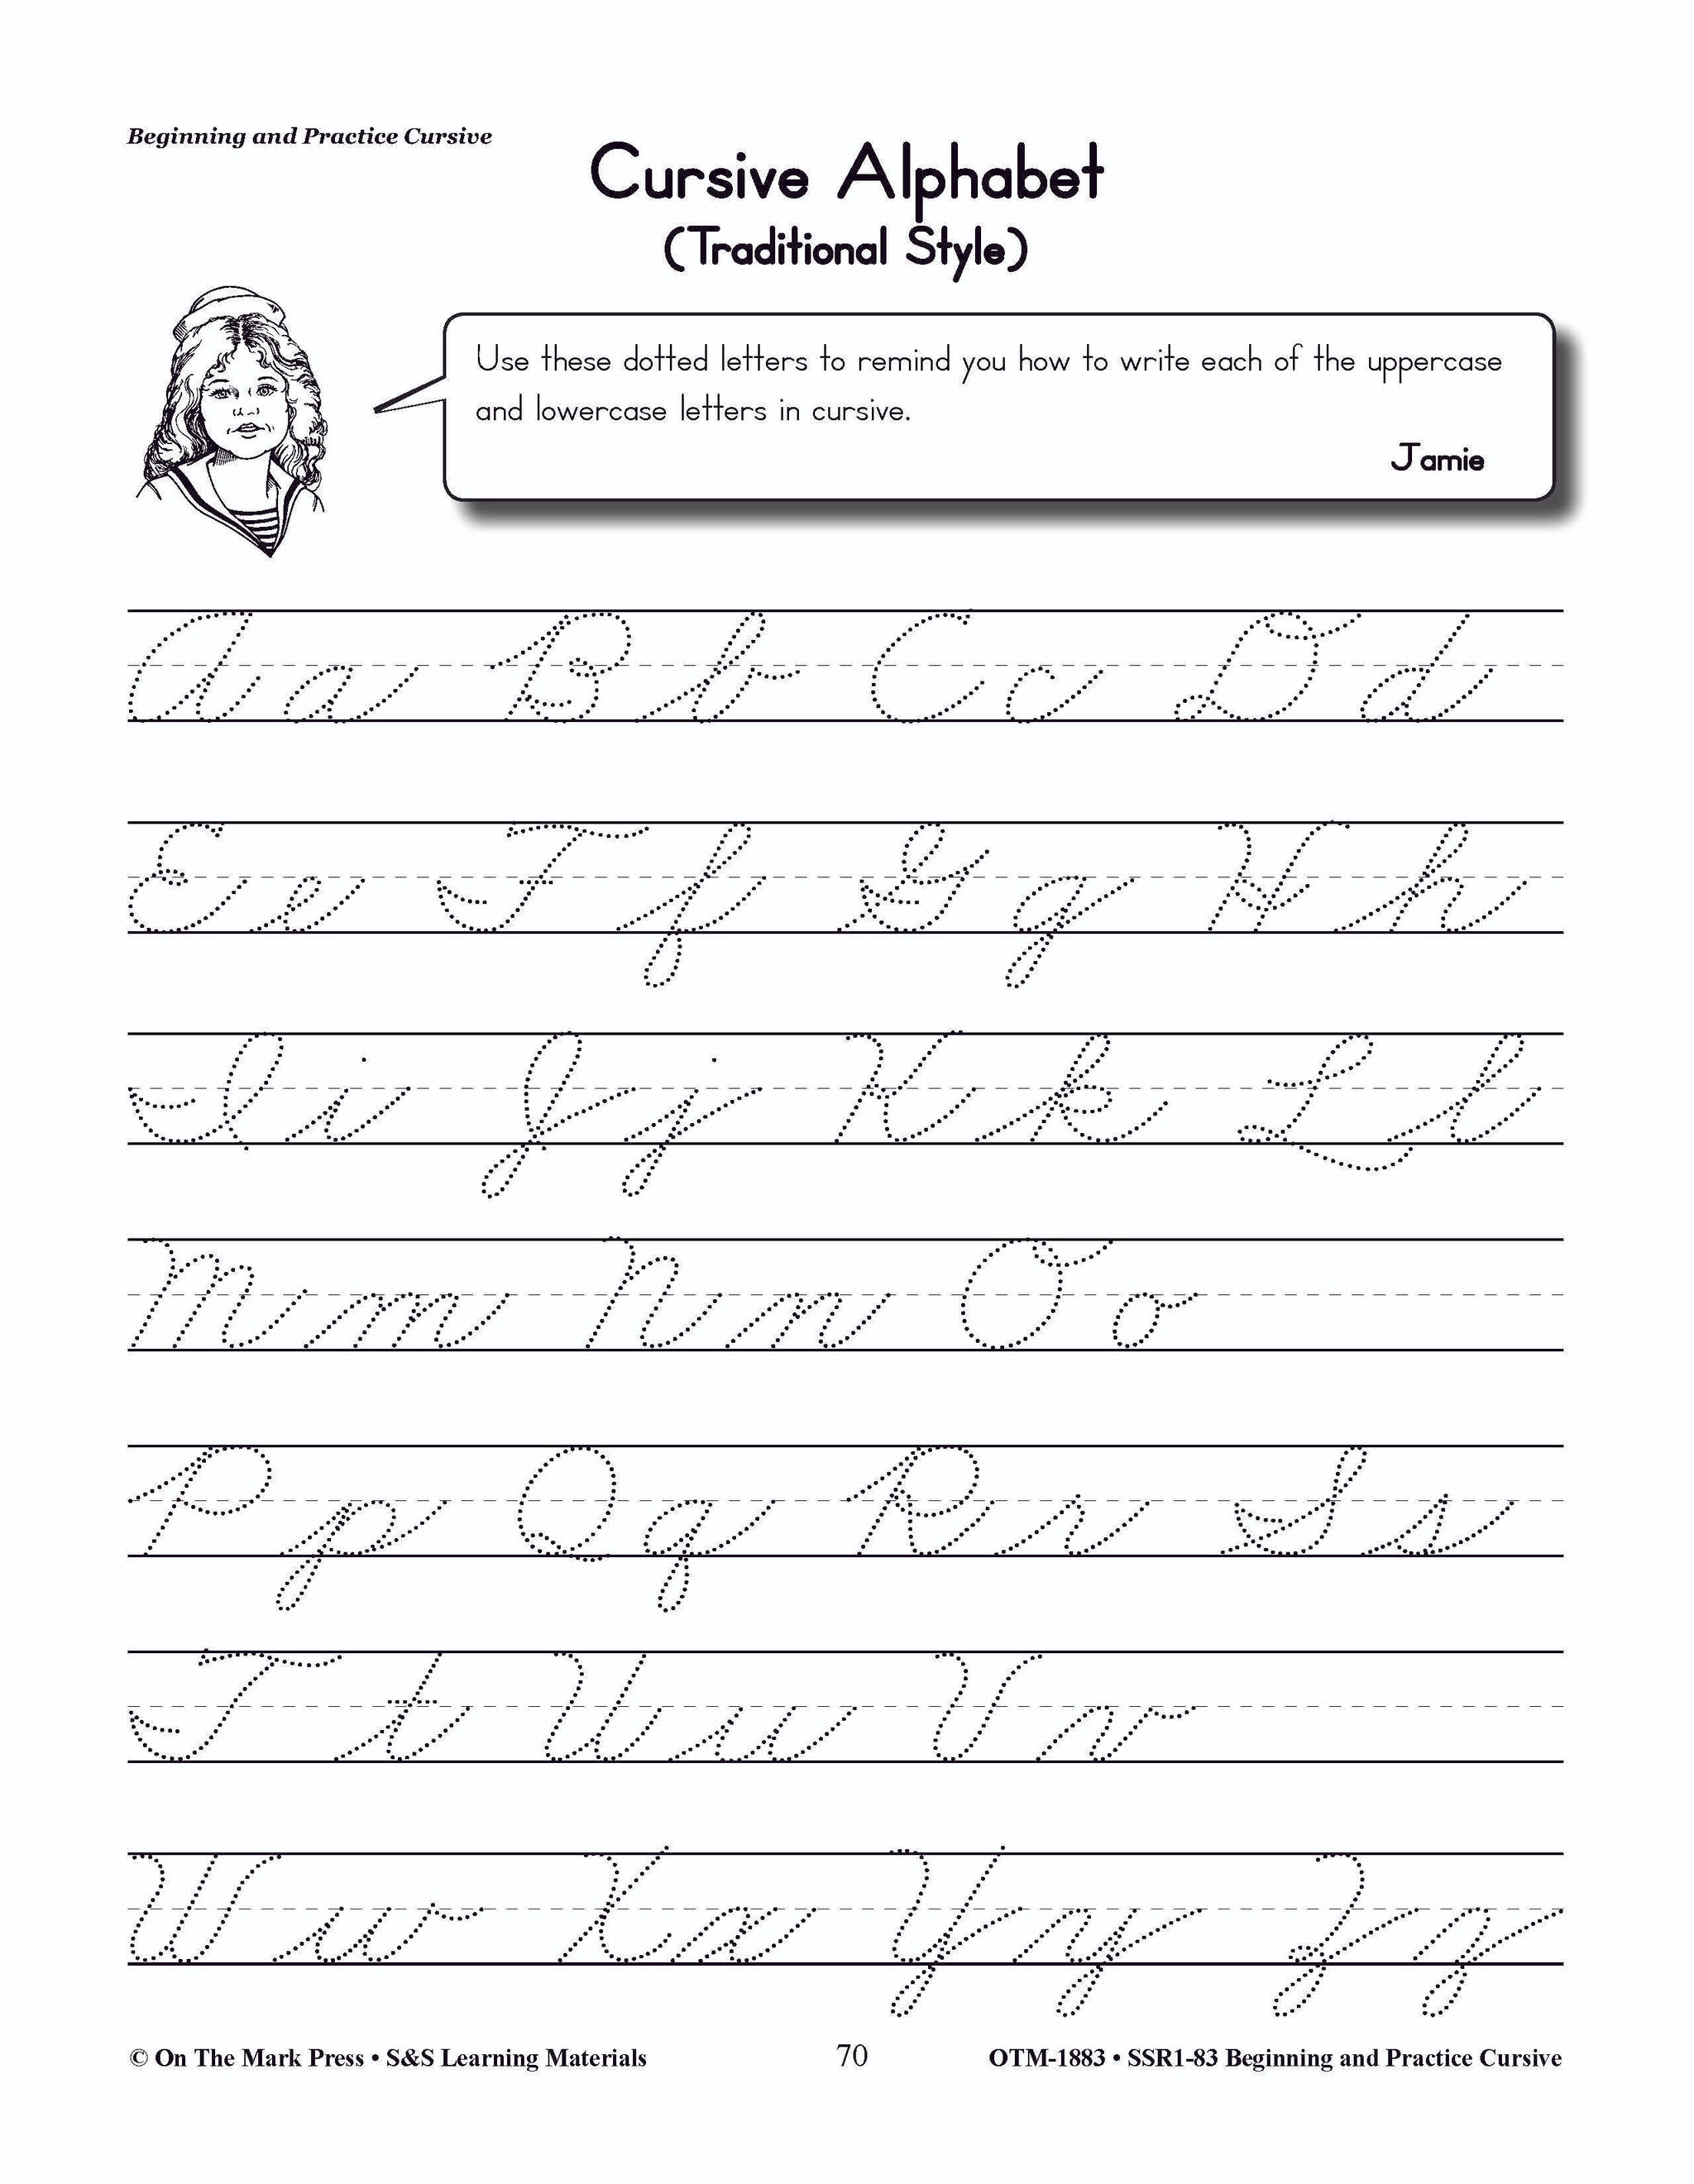 Cursive Handwriting Workbook for Teens Affirmation Quotes